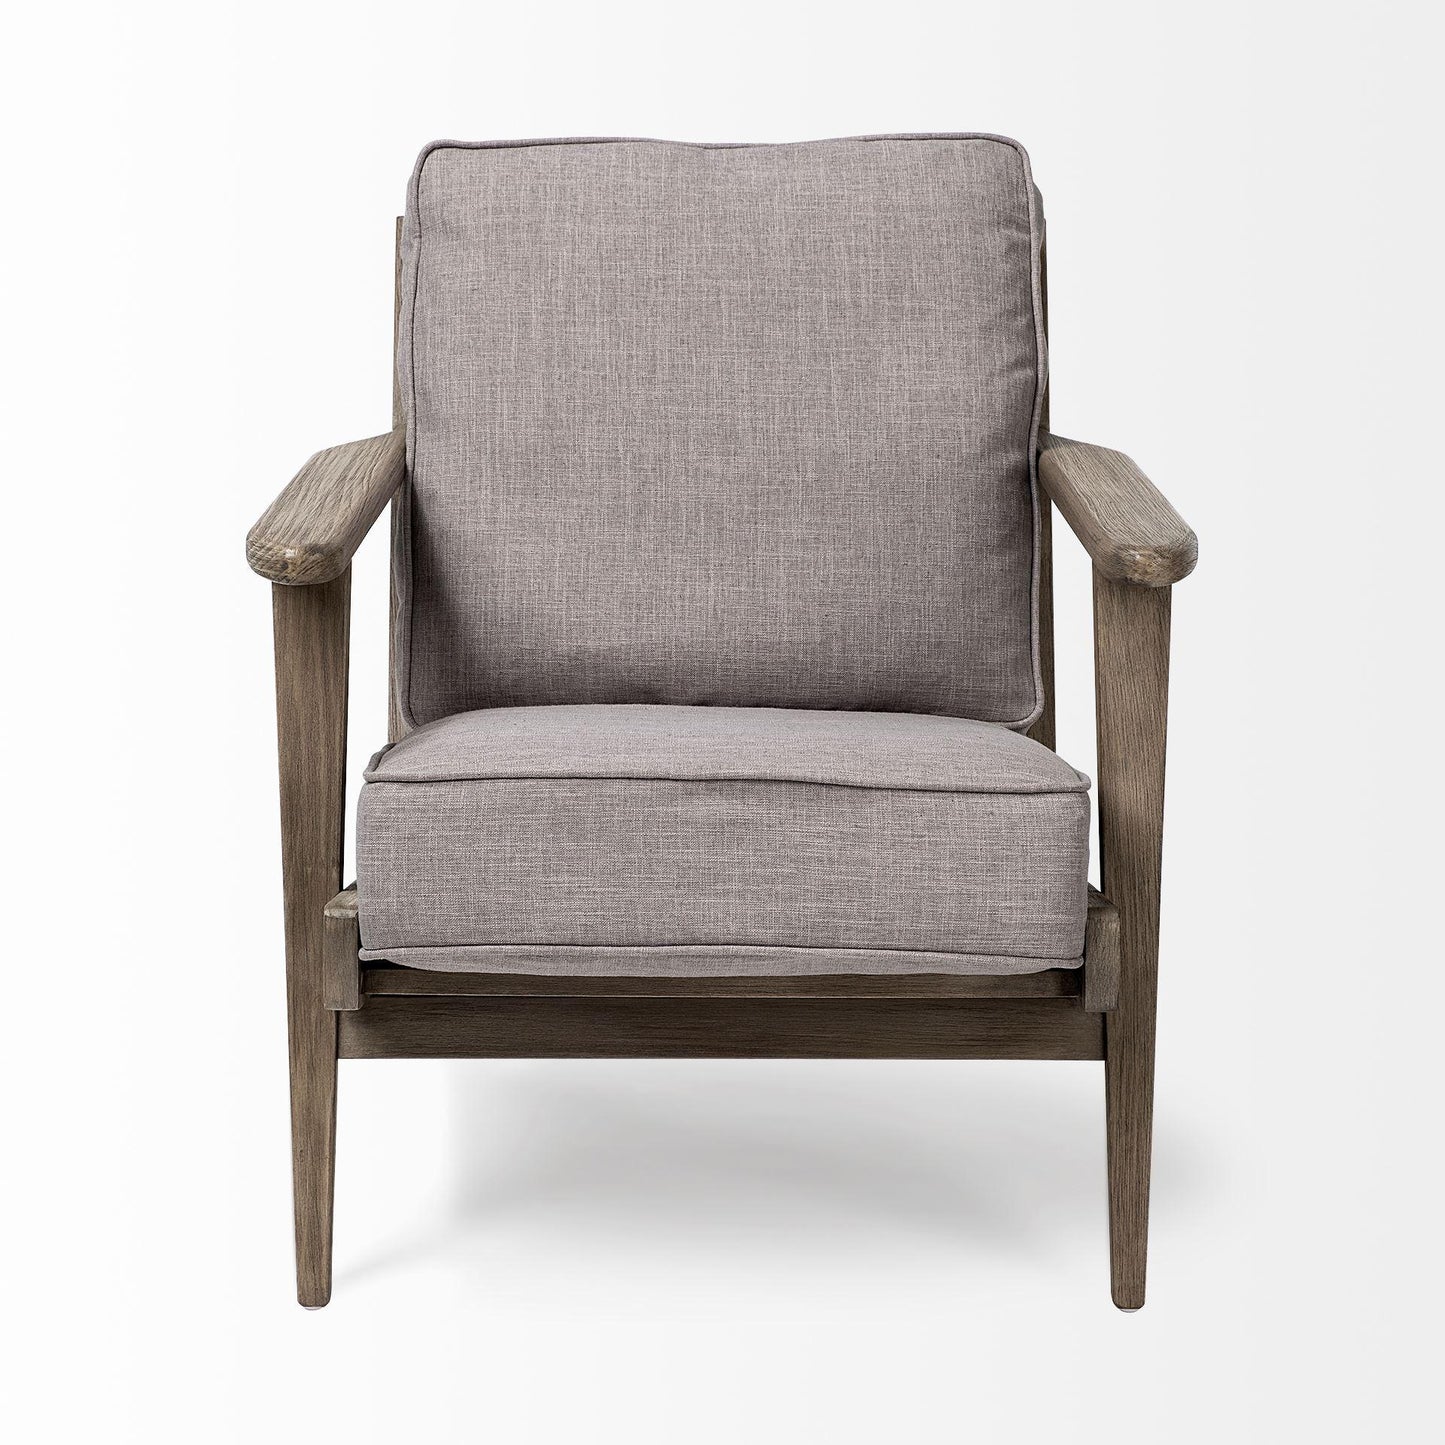 Olympus II Flint Gray Fabric Covered Wooden Frame Accent Chair